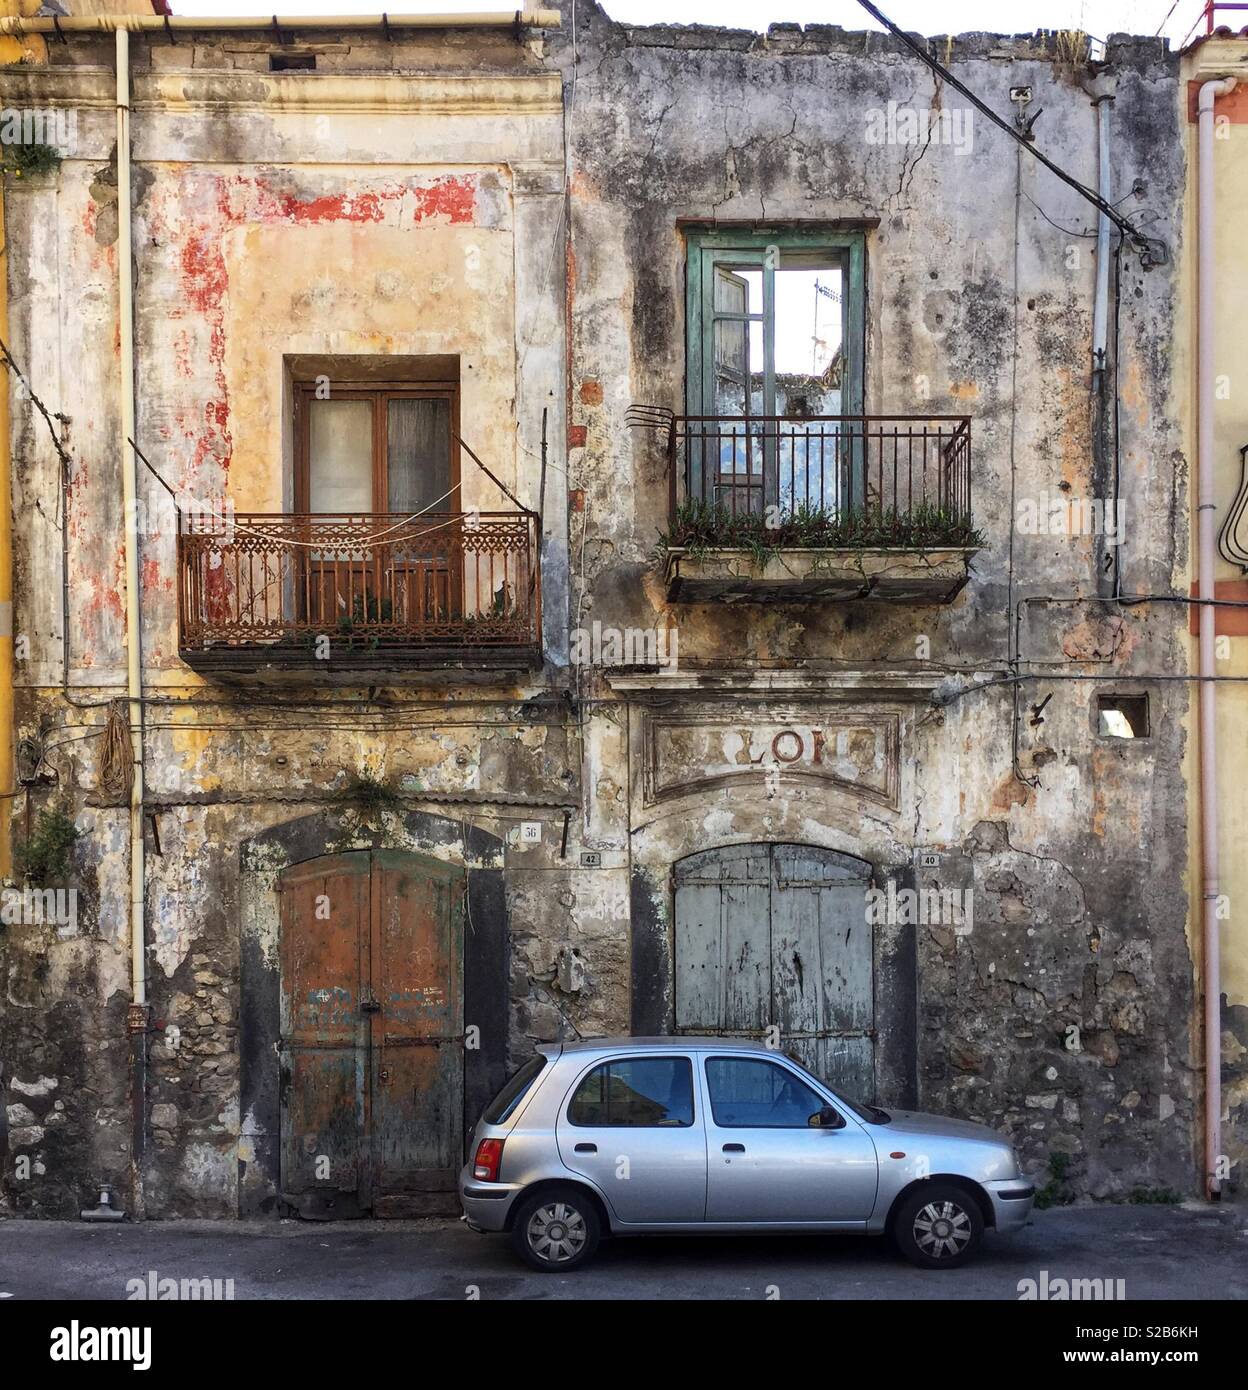 Car parked in front of an old building in Angri, a small town in the Campania region of southern Italy Stock Photo